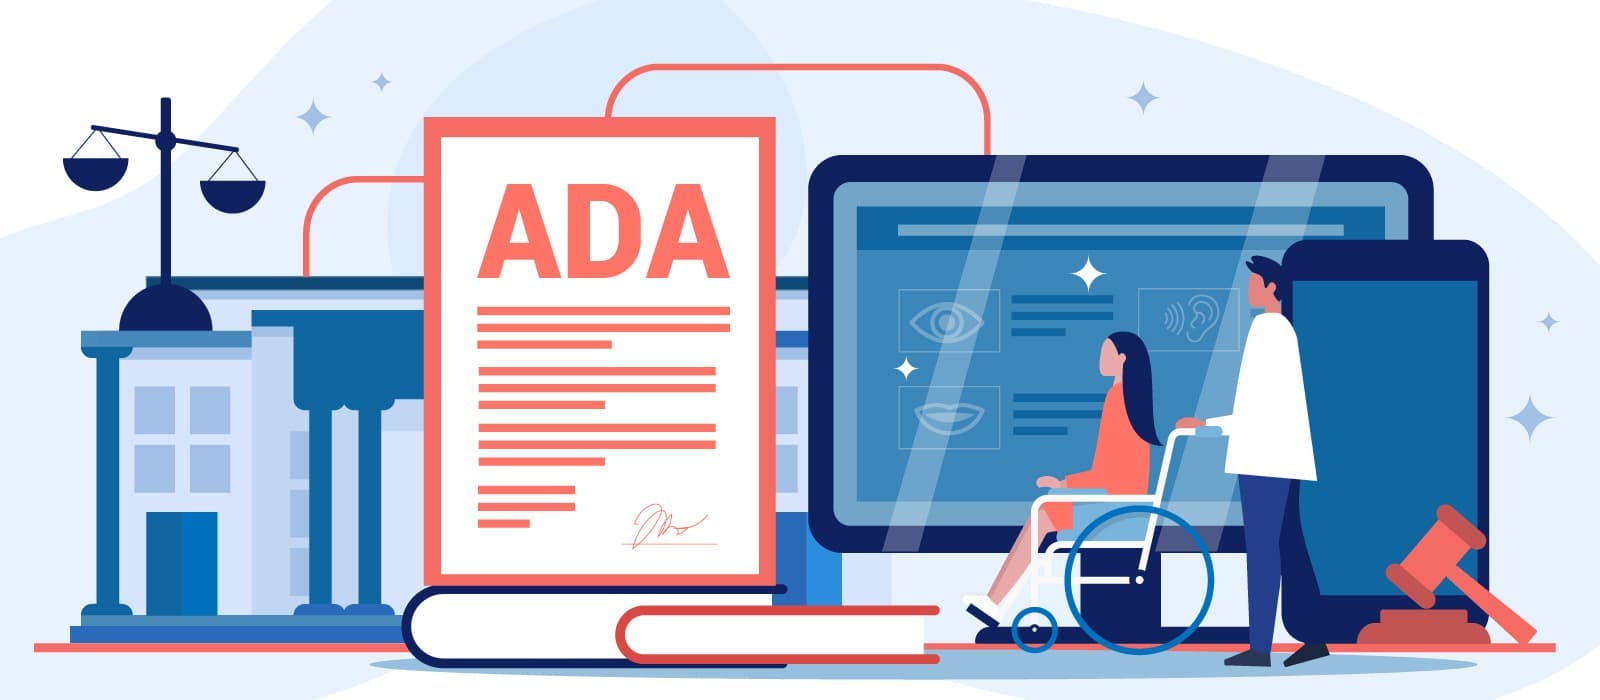 Document with 'ADA' printed on it next to a man pushing a women in a wheelchair and a government building.